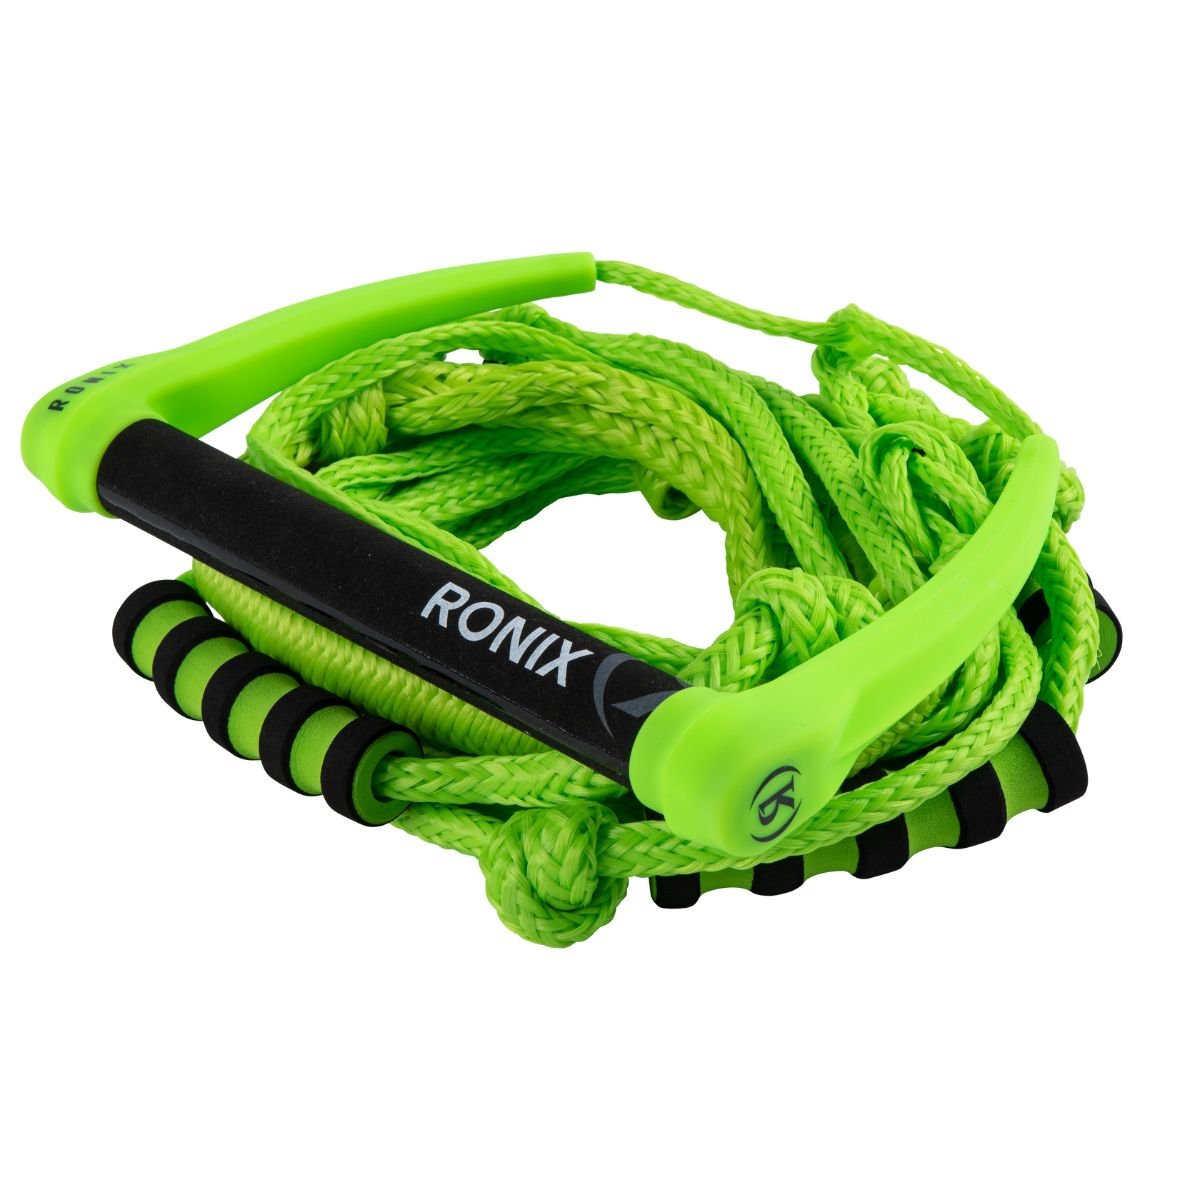 Ronix Silicone Bungee 25' Surf Rope with 11in. Handle in Volt Green - BoardCo